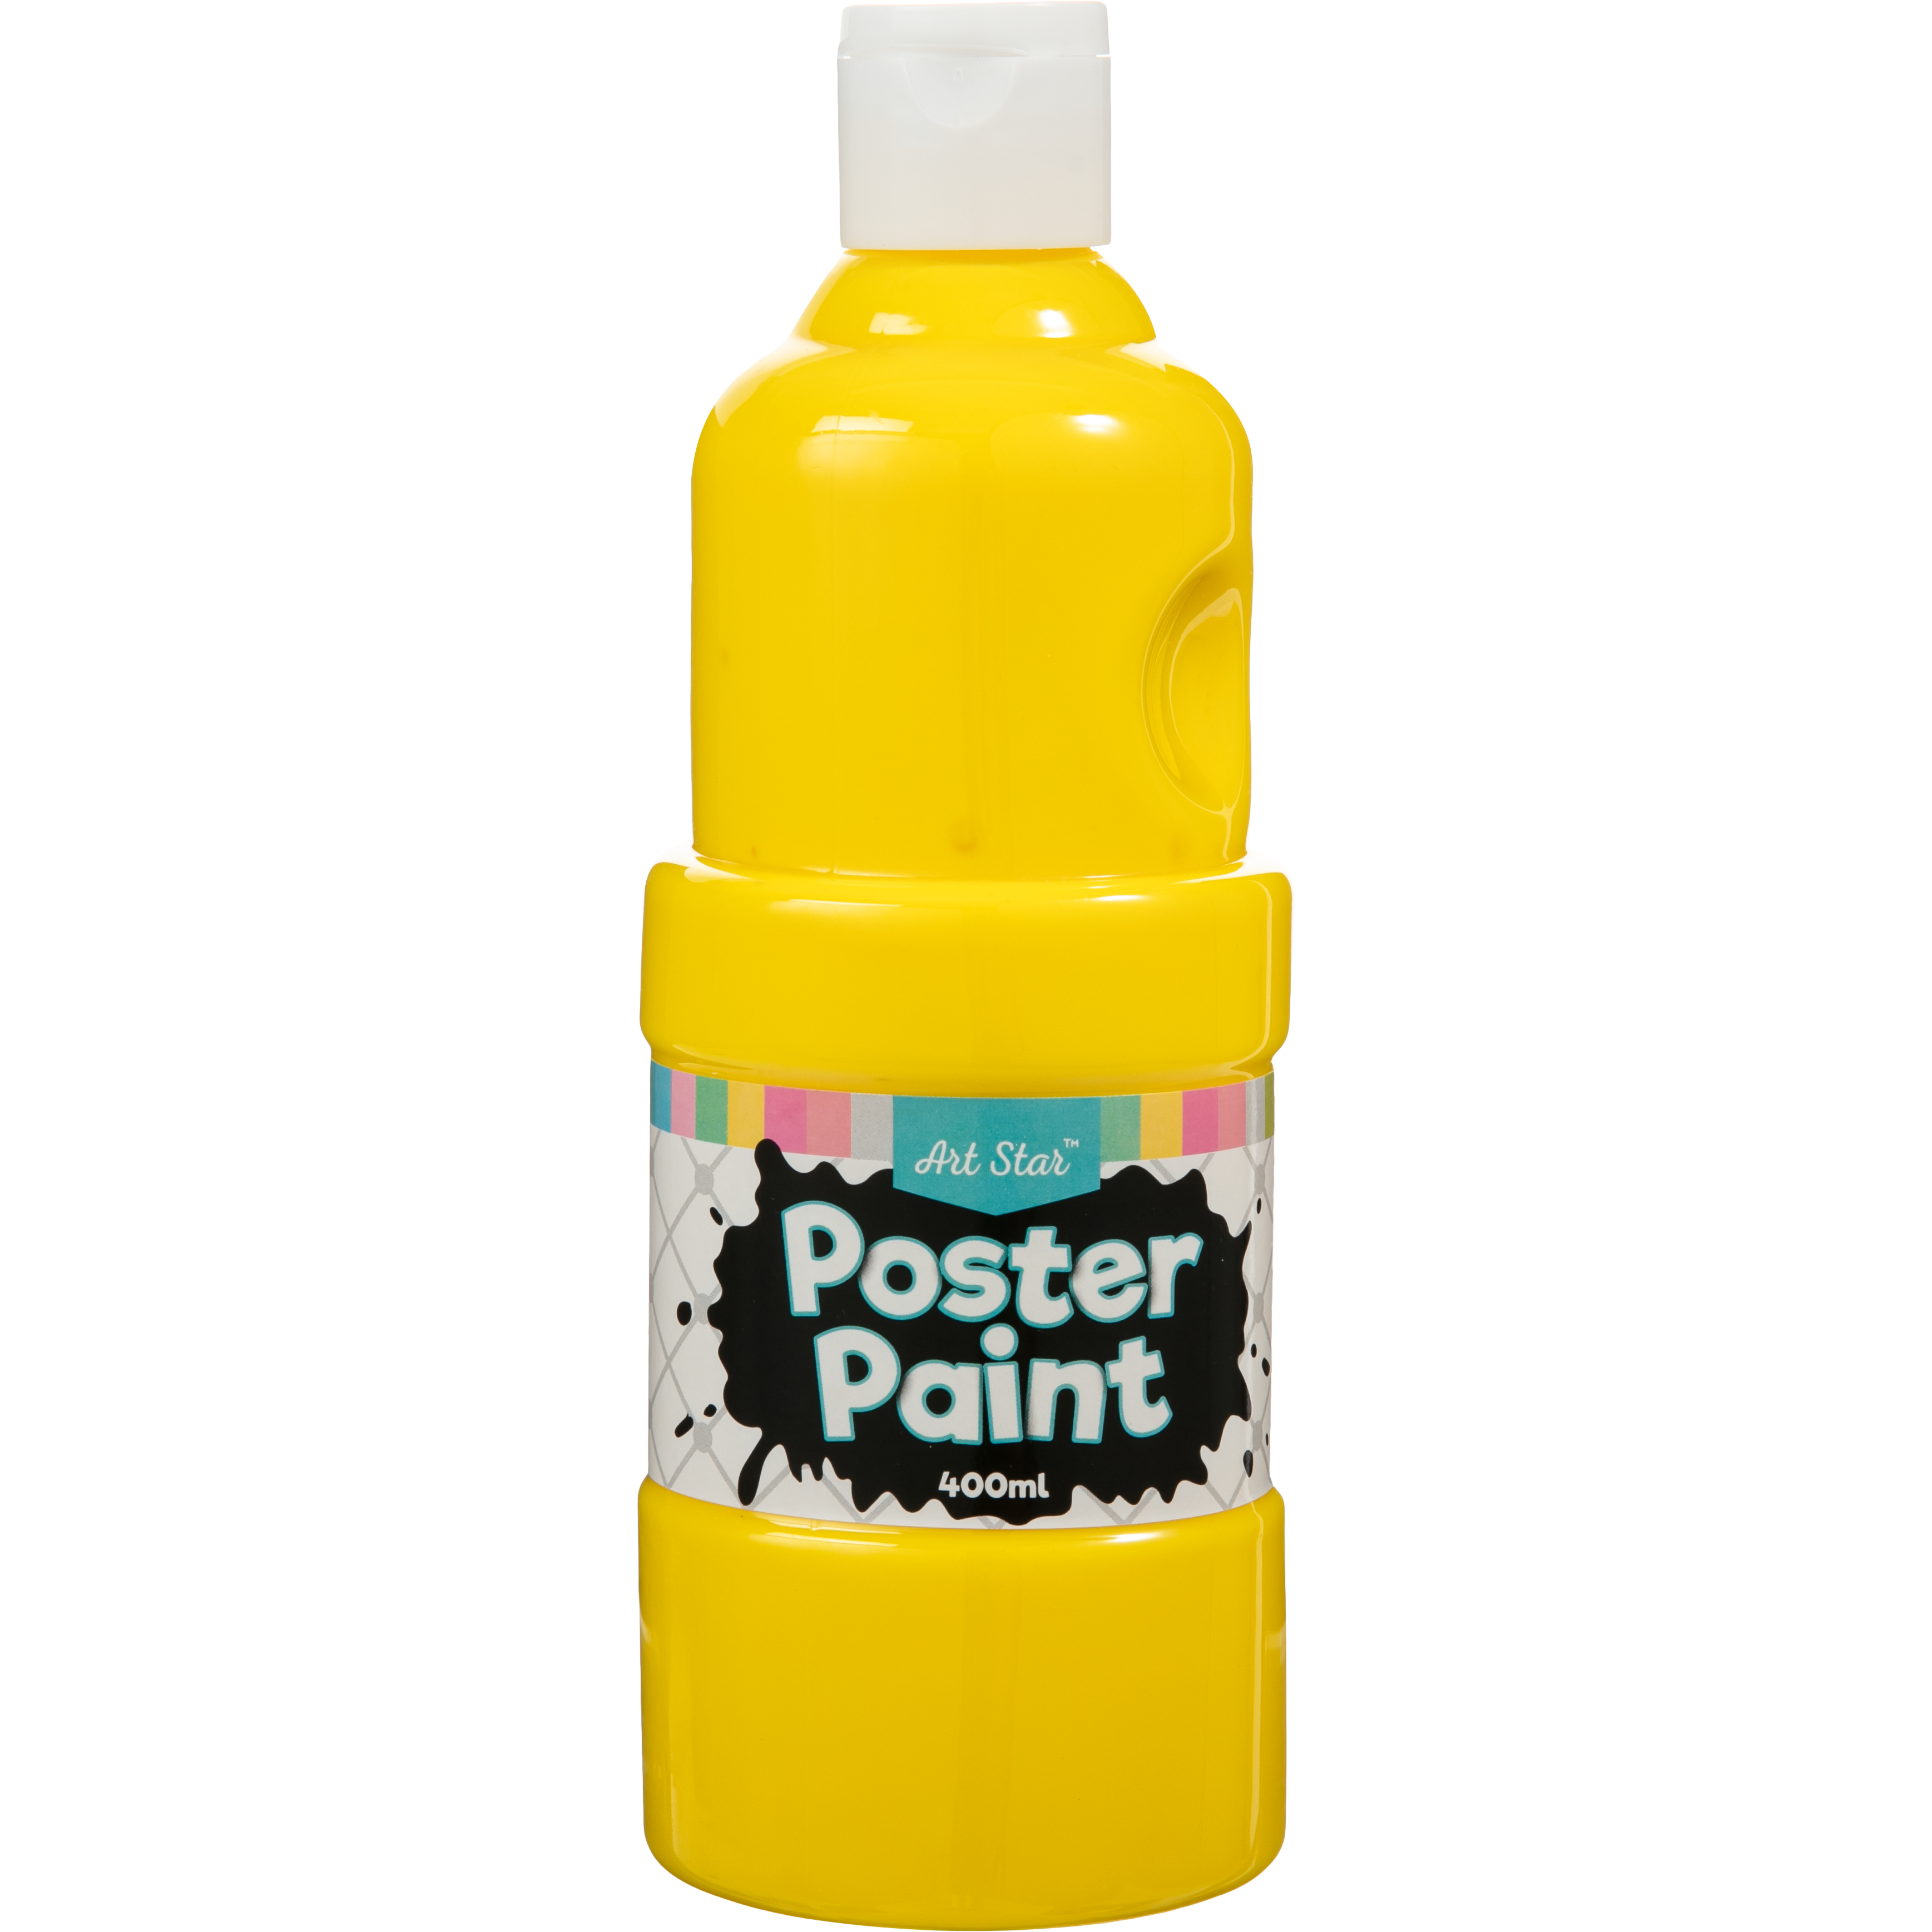 Image of Art Star Poster Paint Yellow 400ml